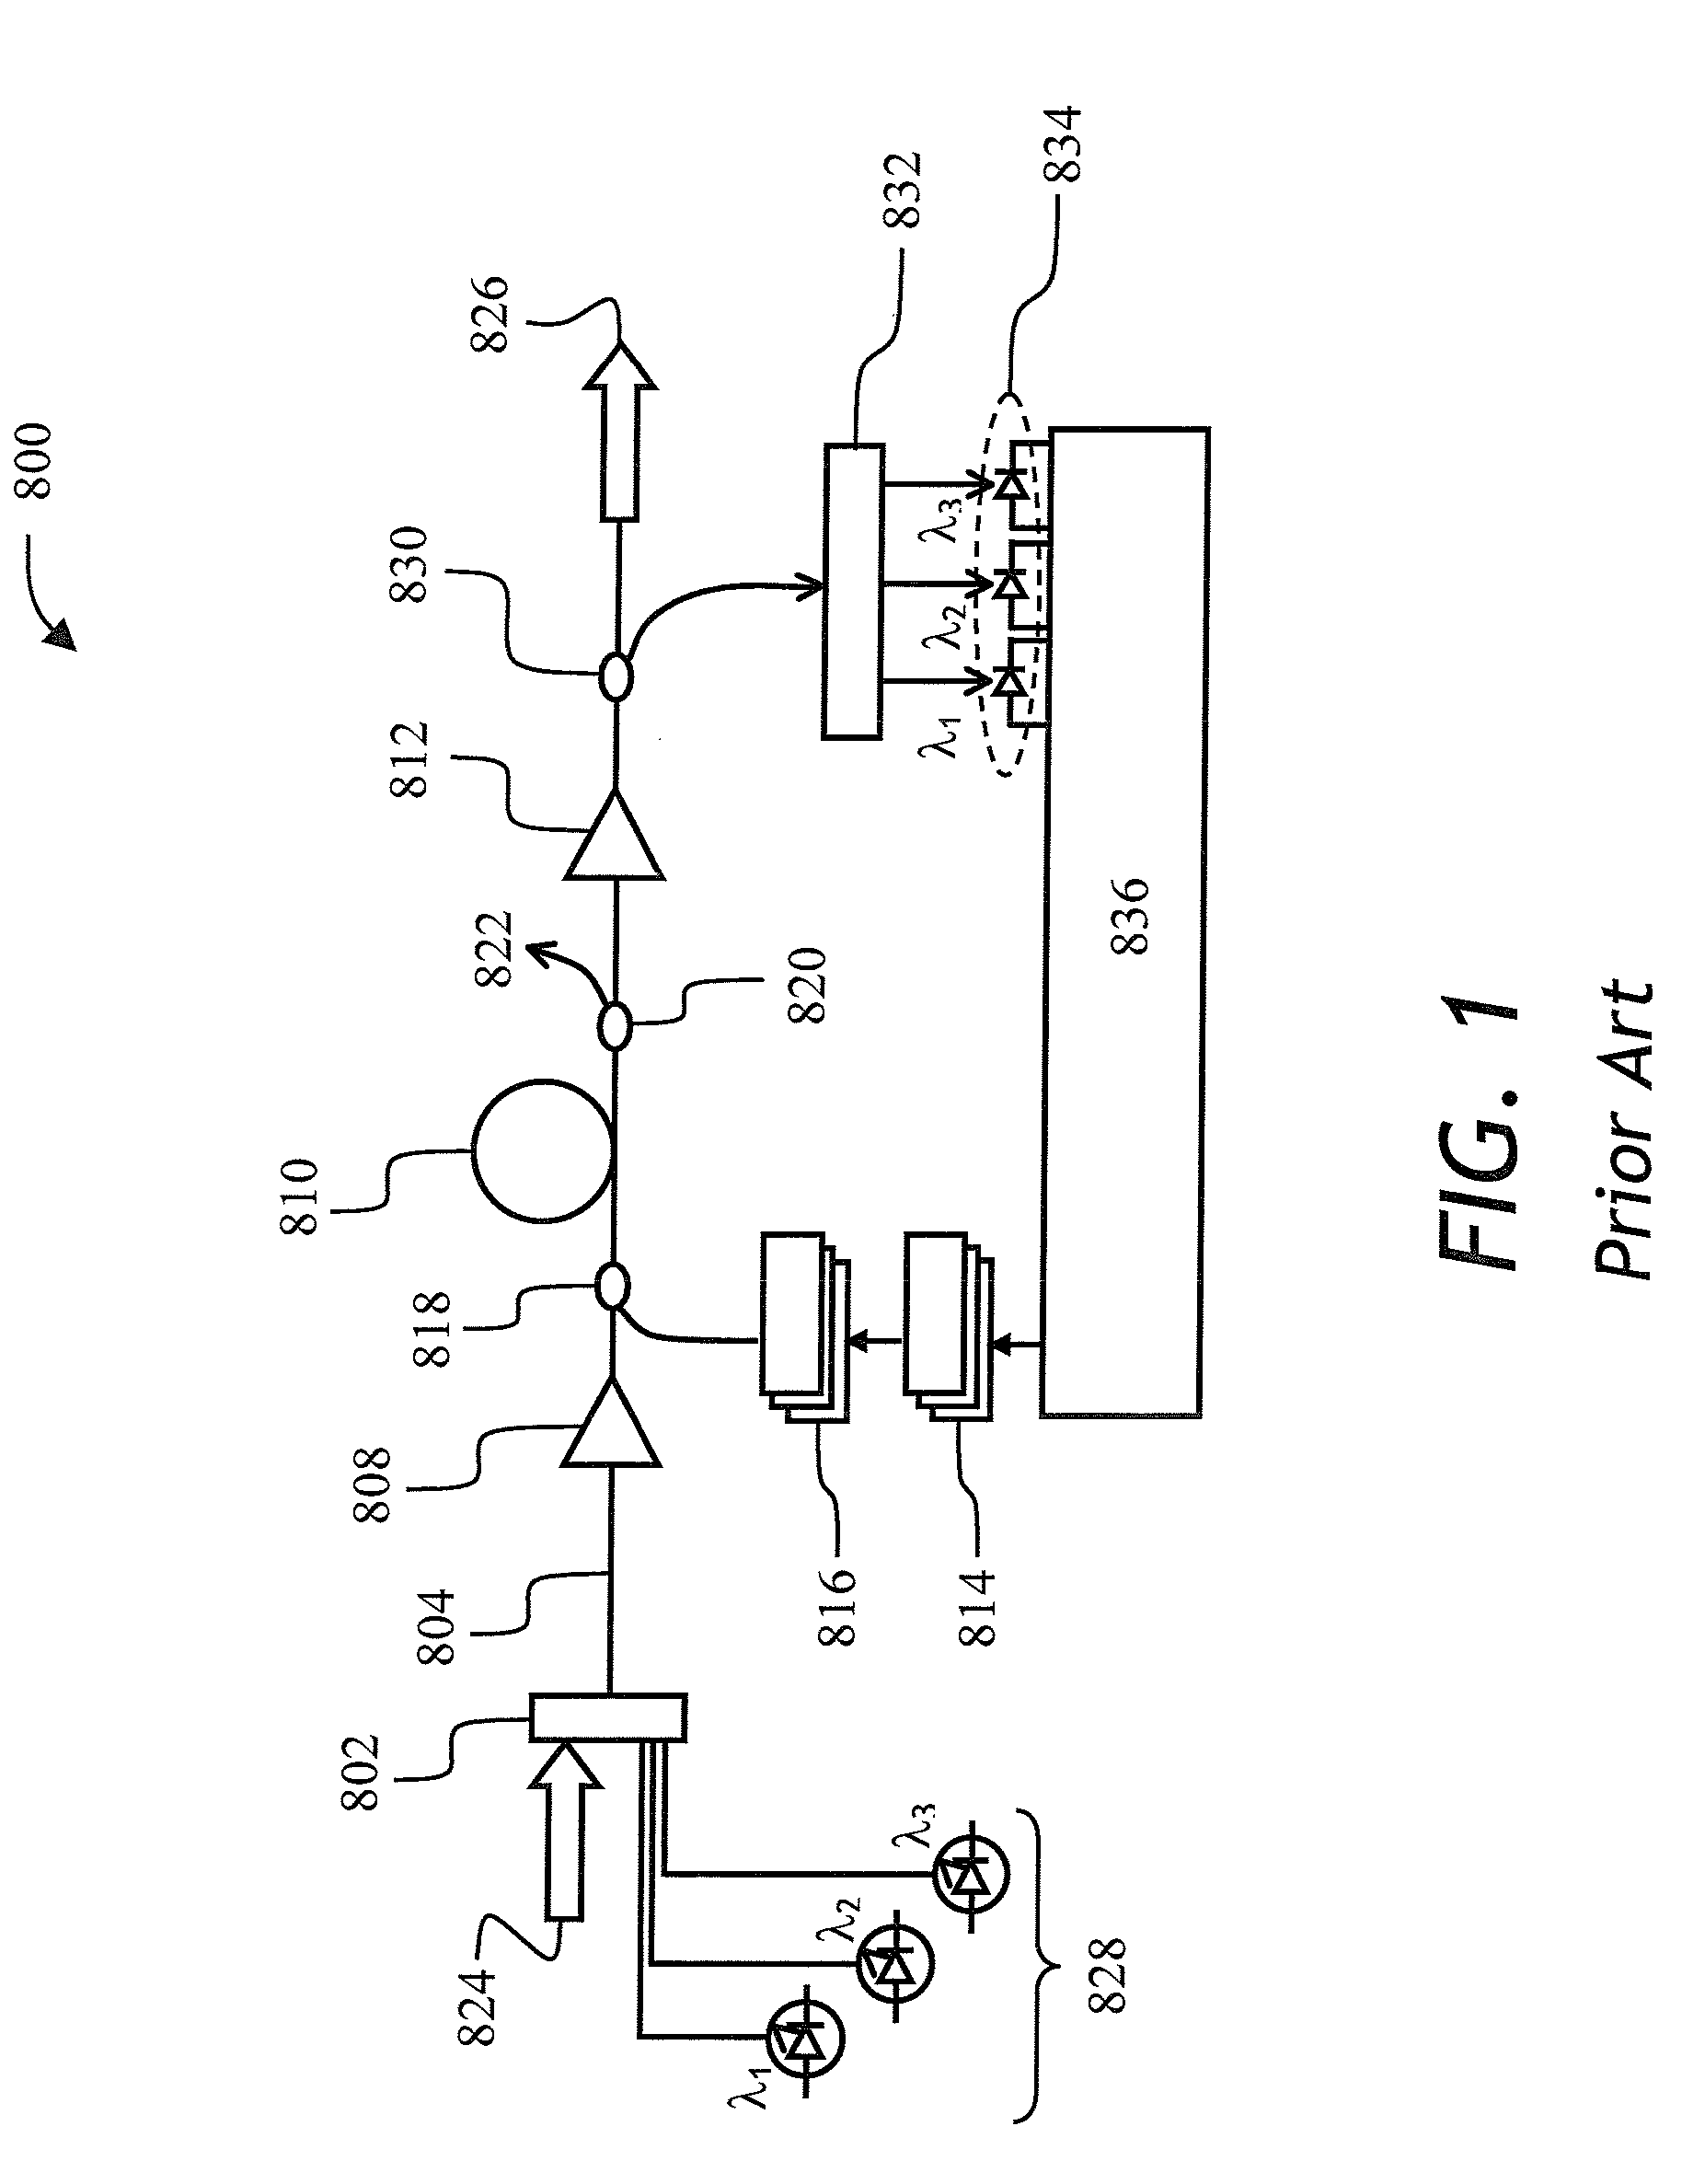 Apparatus and method for flattening gain profile of an optical amplifier